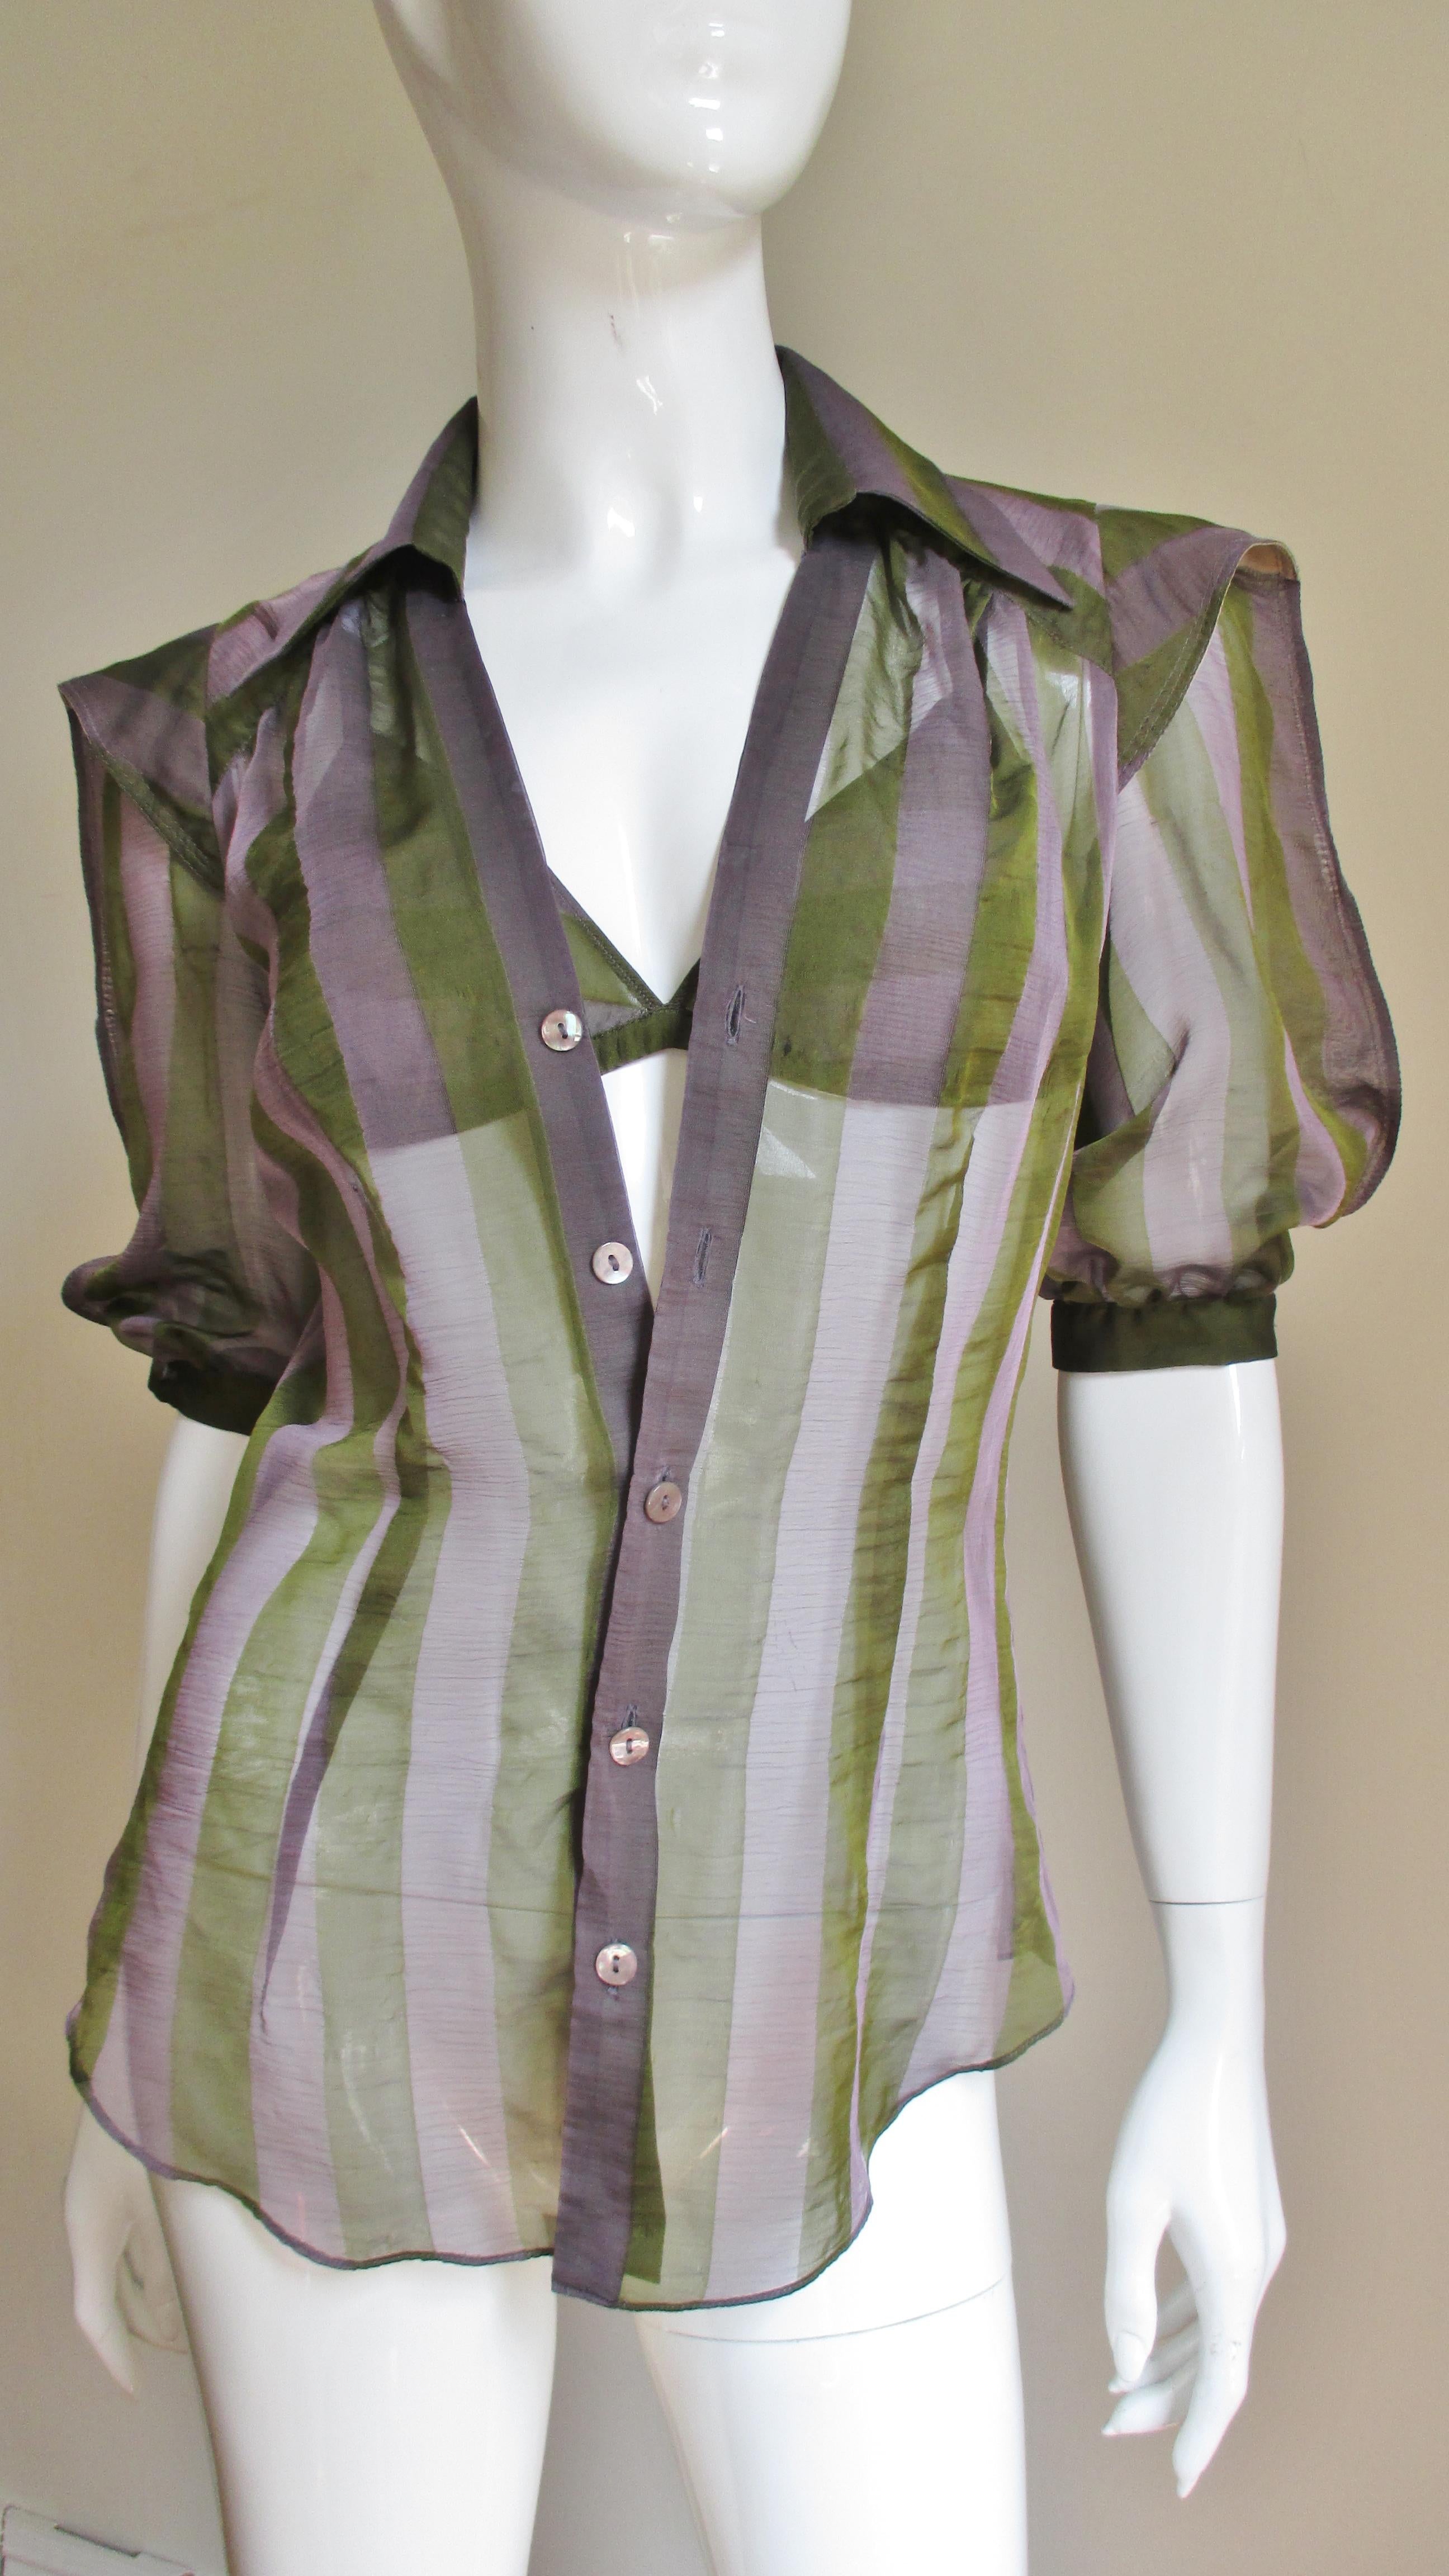 A fabulous matching shirt and bra set in olive and purple striped silk by Jean Paul Gaultier.  The princess seam shirt has fabulous full elbow length sleeves with button cuffs from extended shoulder detail.  It has a shirt collar and buttons up the